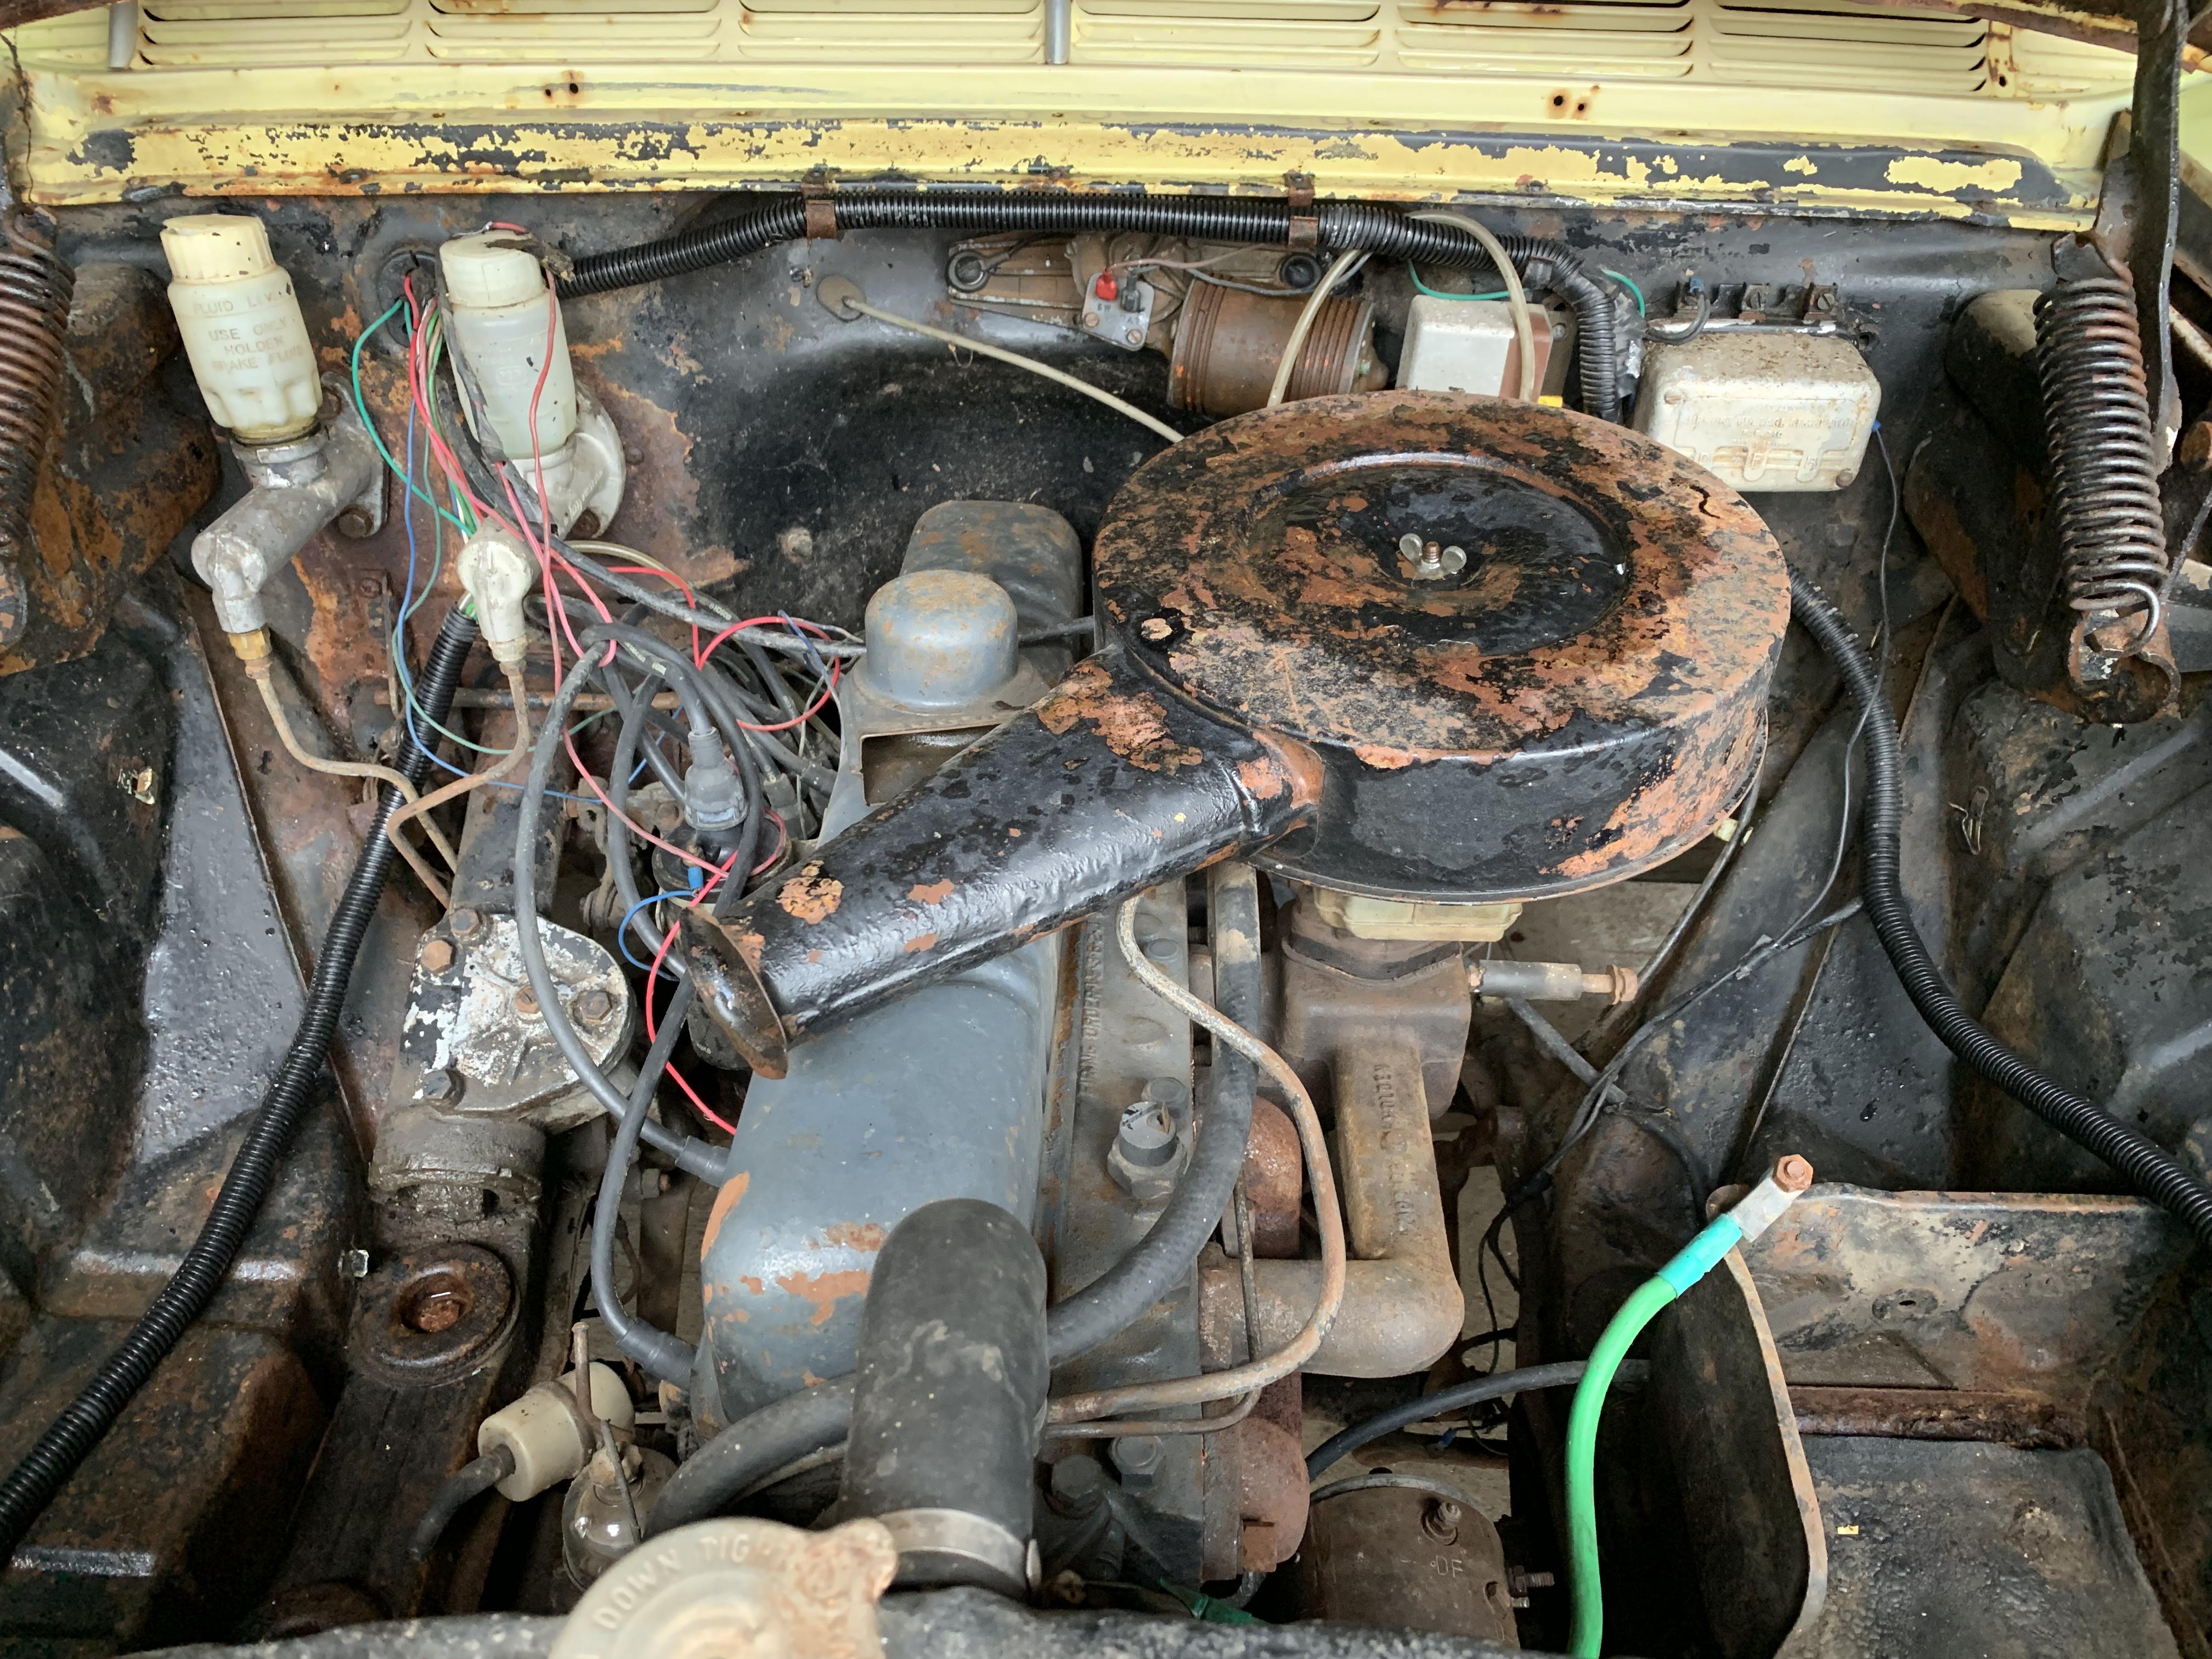 There was an engine. A mighty grey. A Repco reconditioned motor that had done 12k miles.